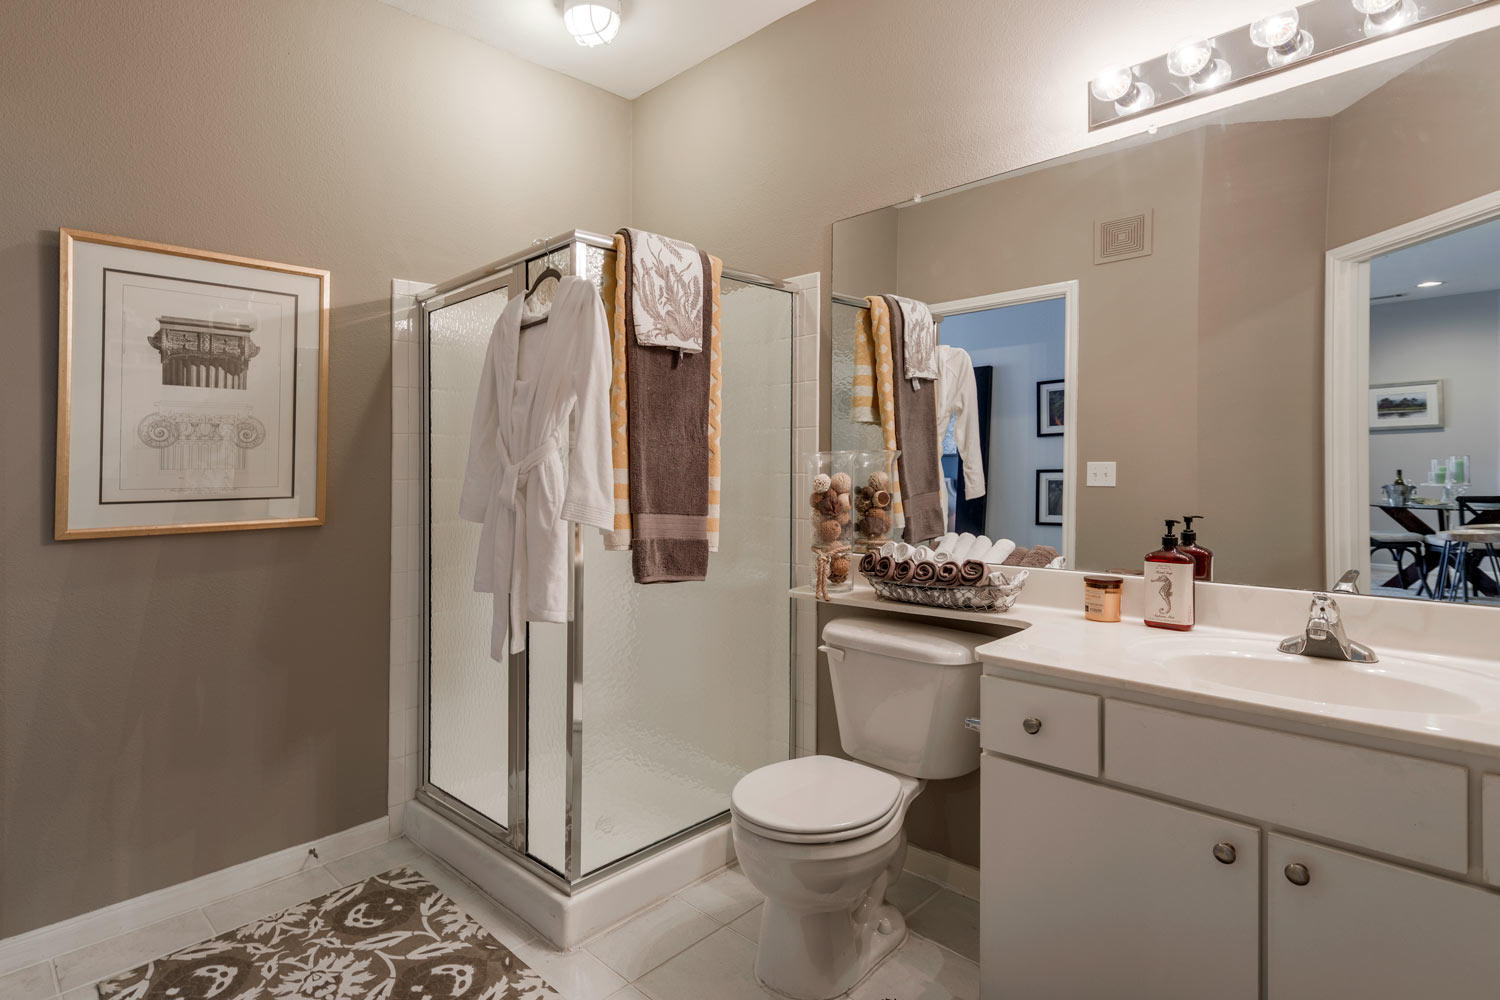 Bathroom with stand in shower and ample storage